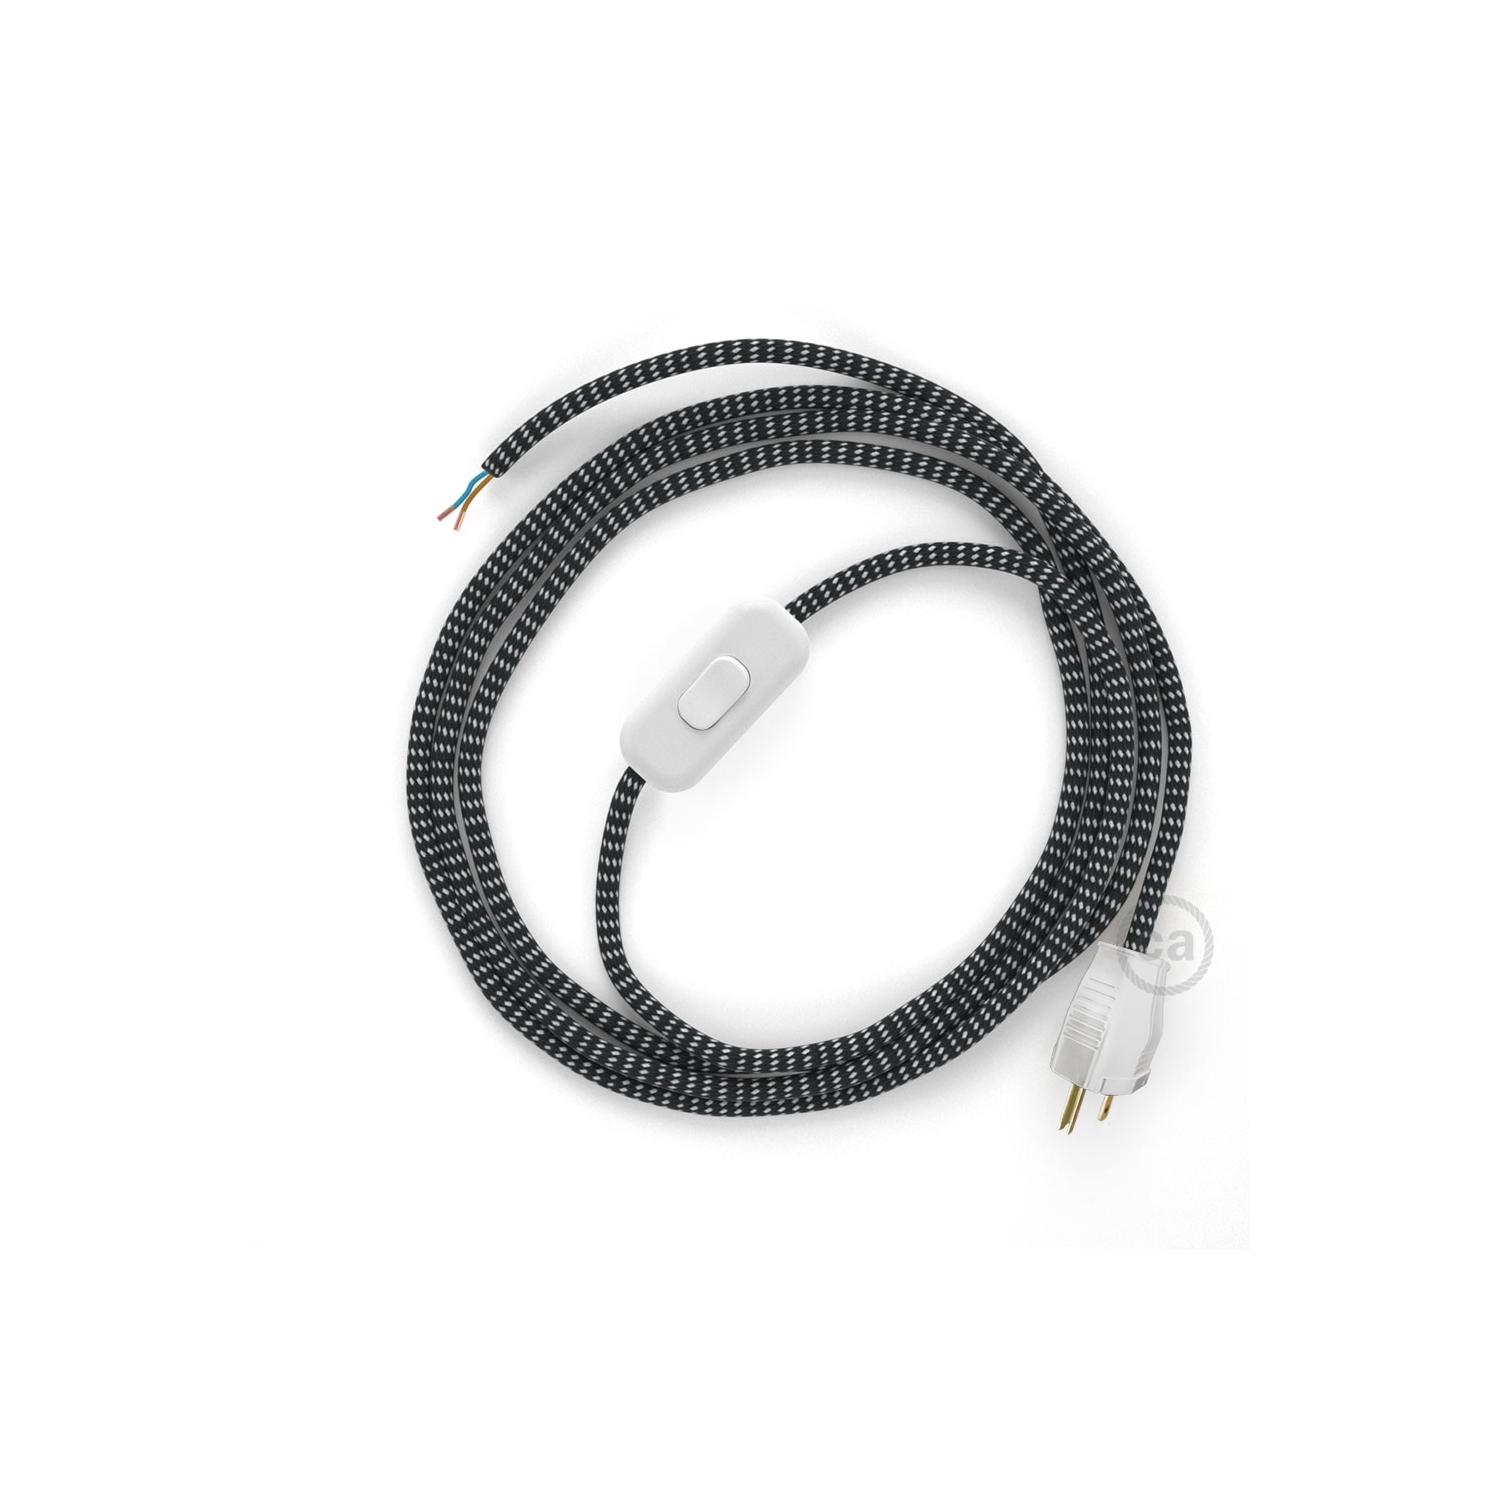 Power Cord with in-line switch, RT41 Black & White Tracer - Choose color of switch/plug